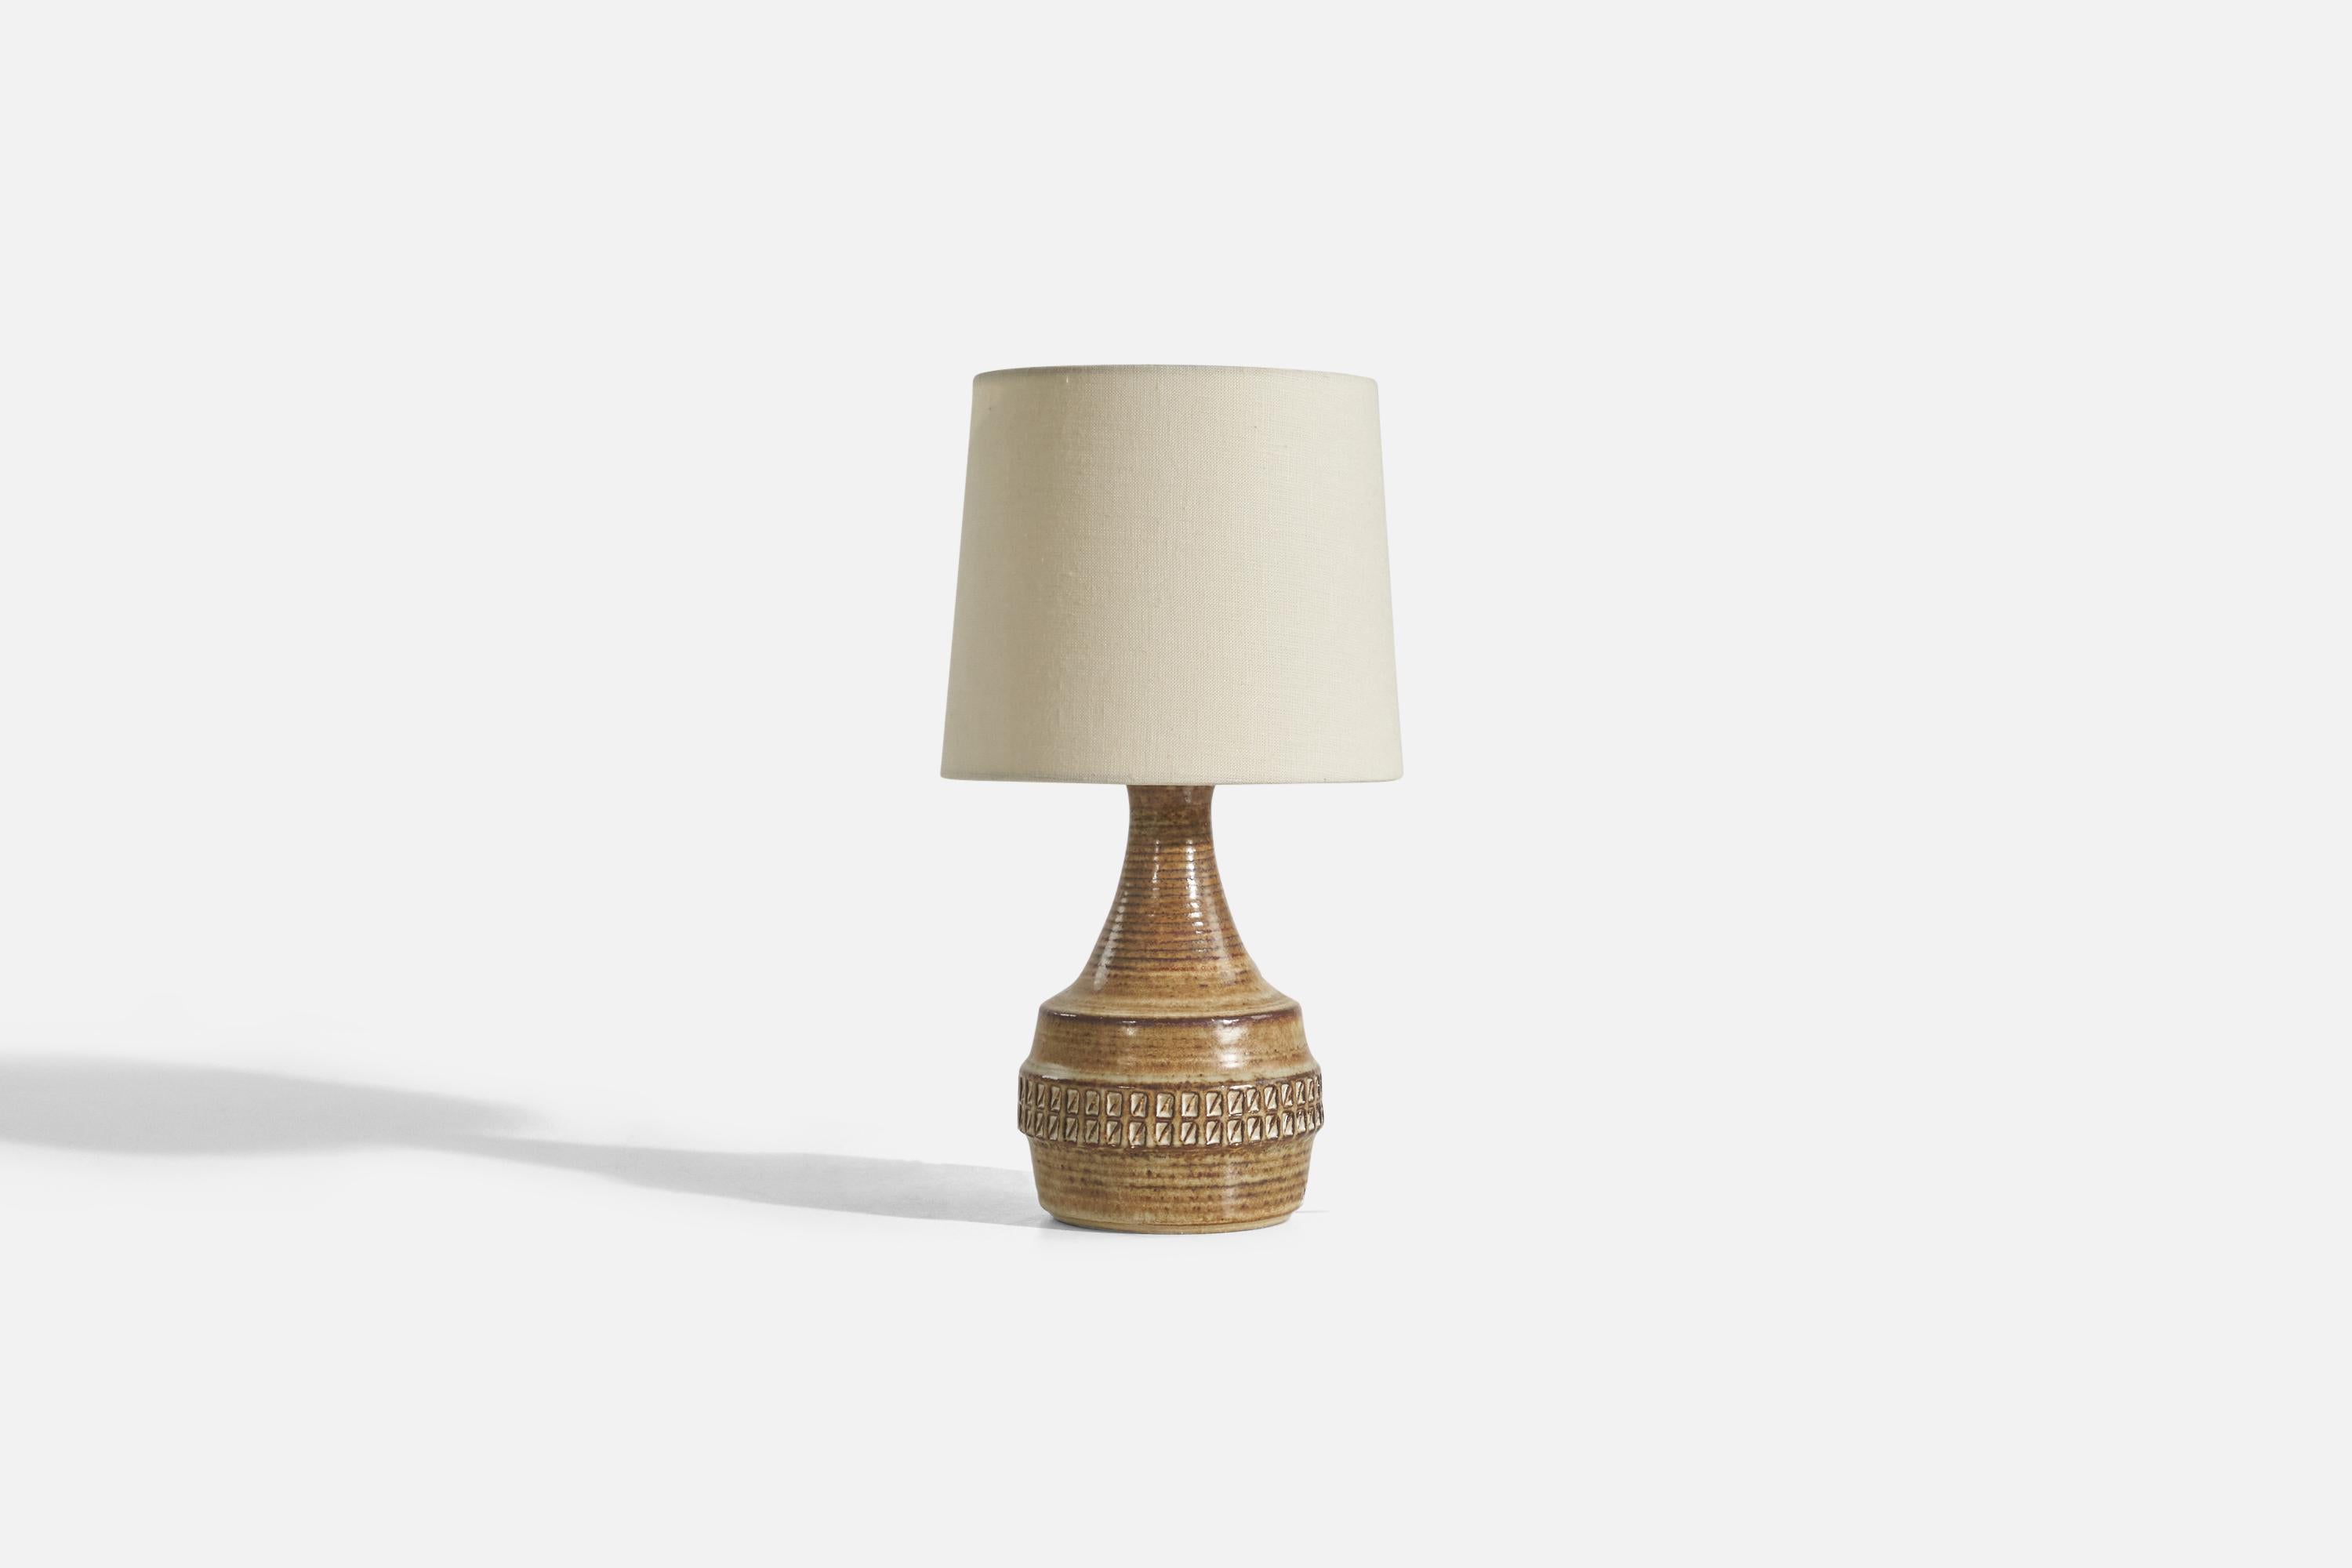 A light brown, glazed stoneware table lamp designed by Joseph Simon and produced by Søholm Keramik, Bornholm, Denmark, 1960s. 

Sold without Lampshade.
Dimensions of Lamp (inches) : 10.5 x 5.37 x 5.37 (Height x Width x Depth)
Dimensions of Shade